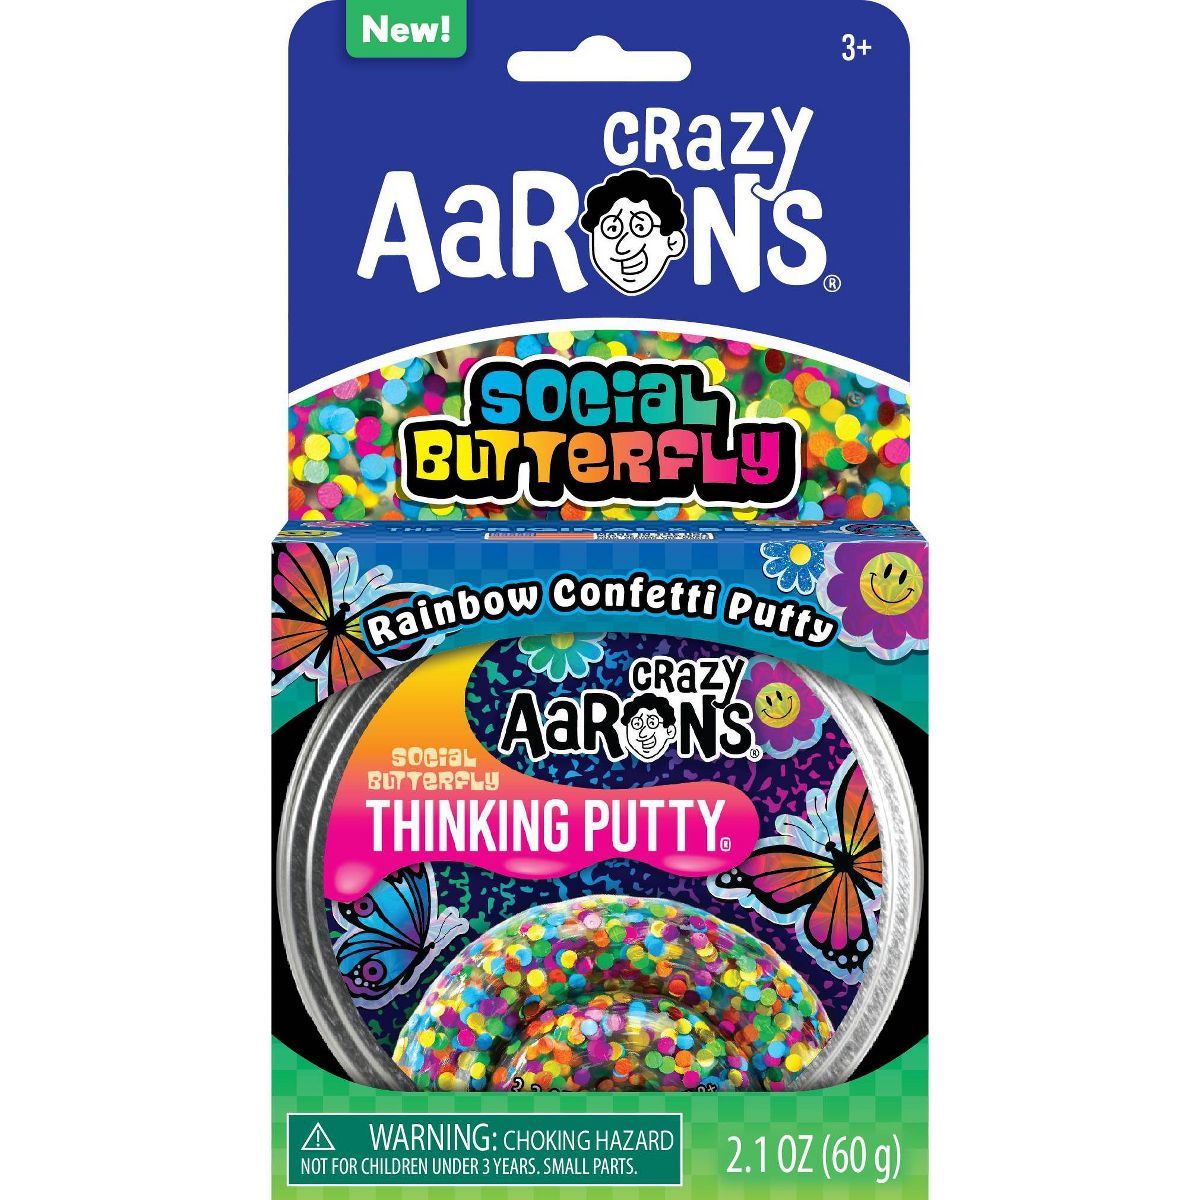 Crazy Aaron's Social Butterfly 3.5" Thinking Putty Tin | Target